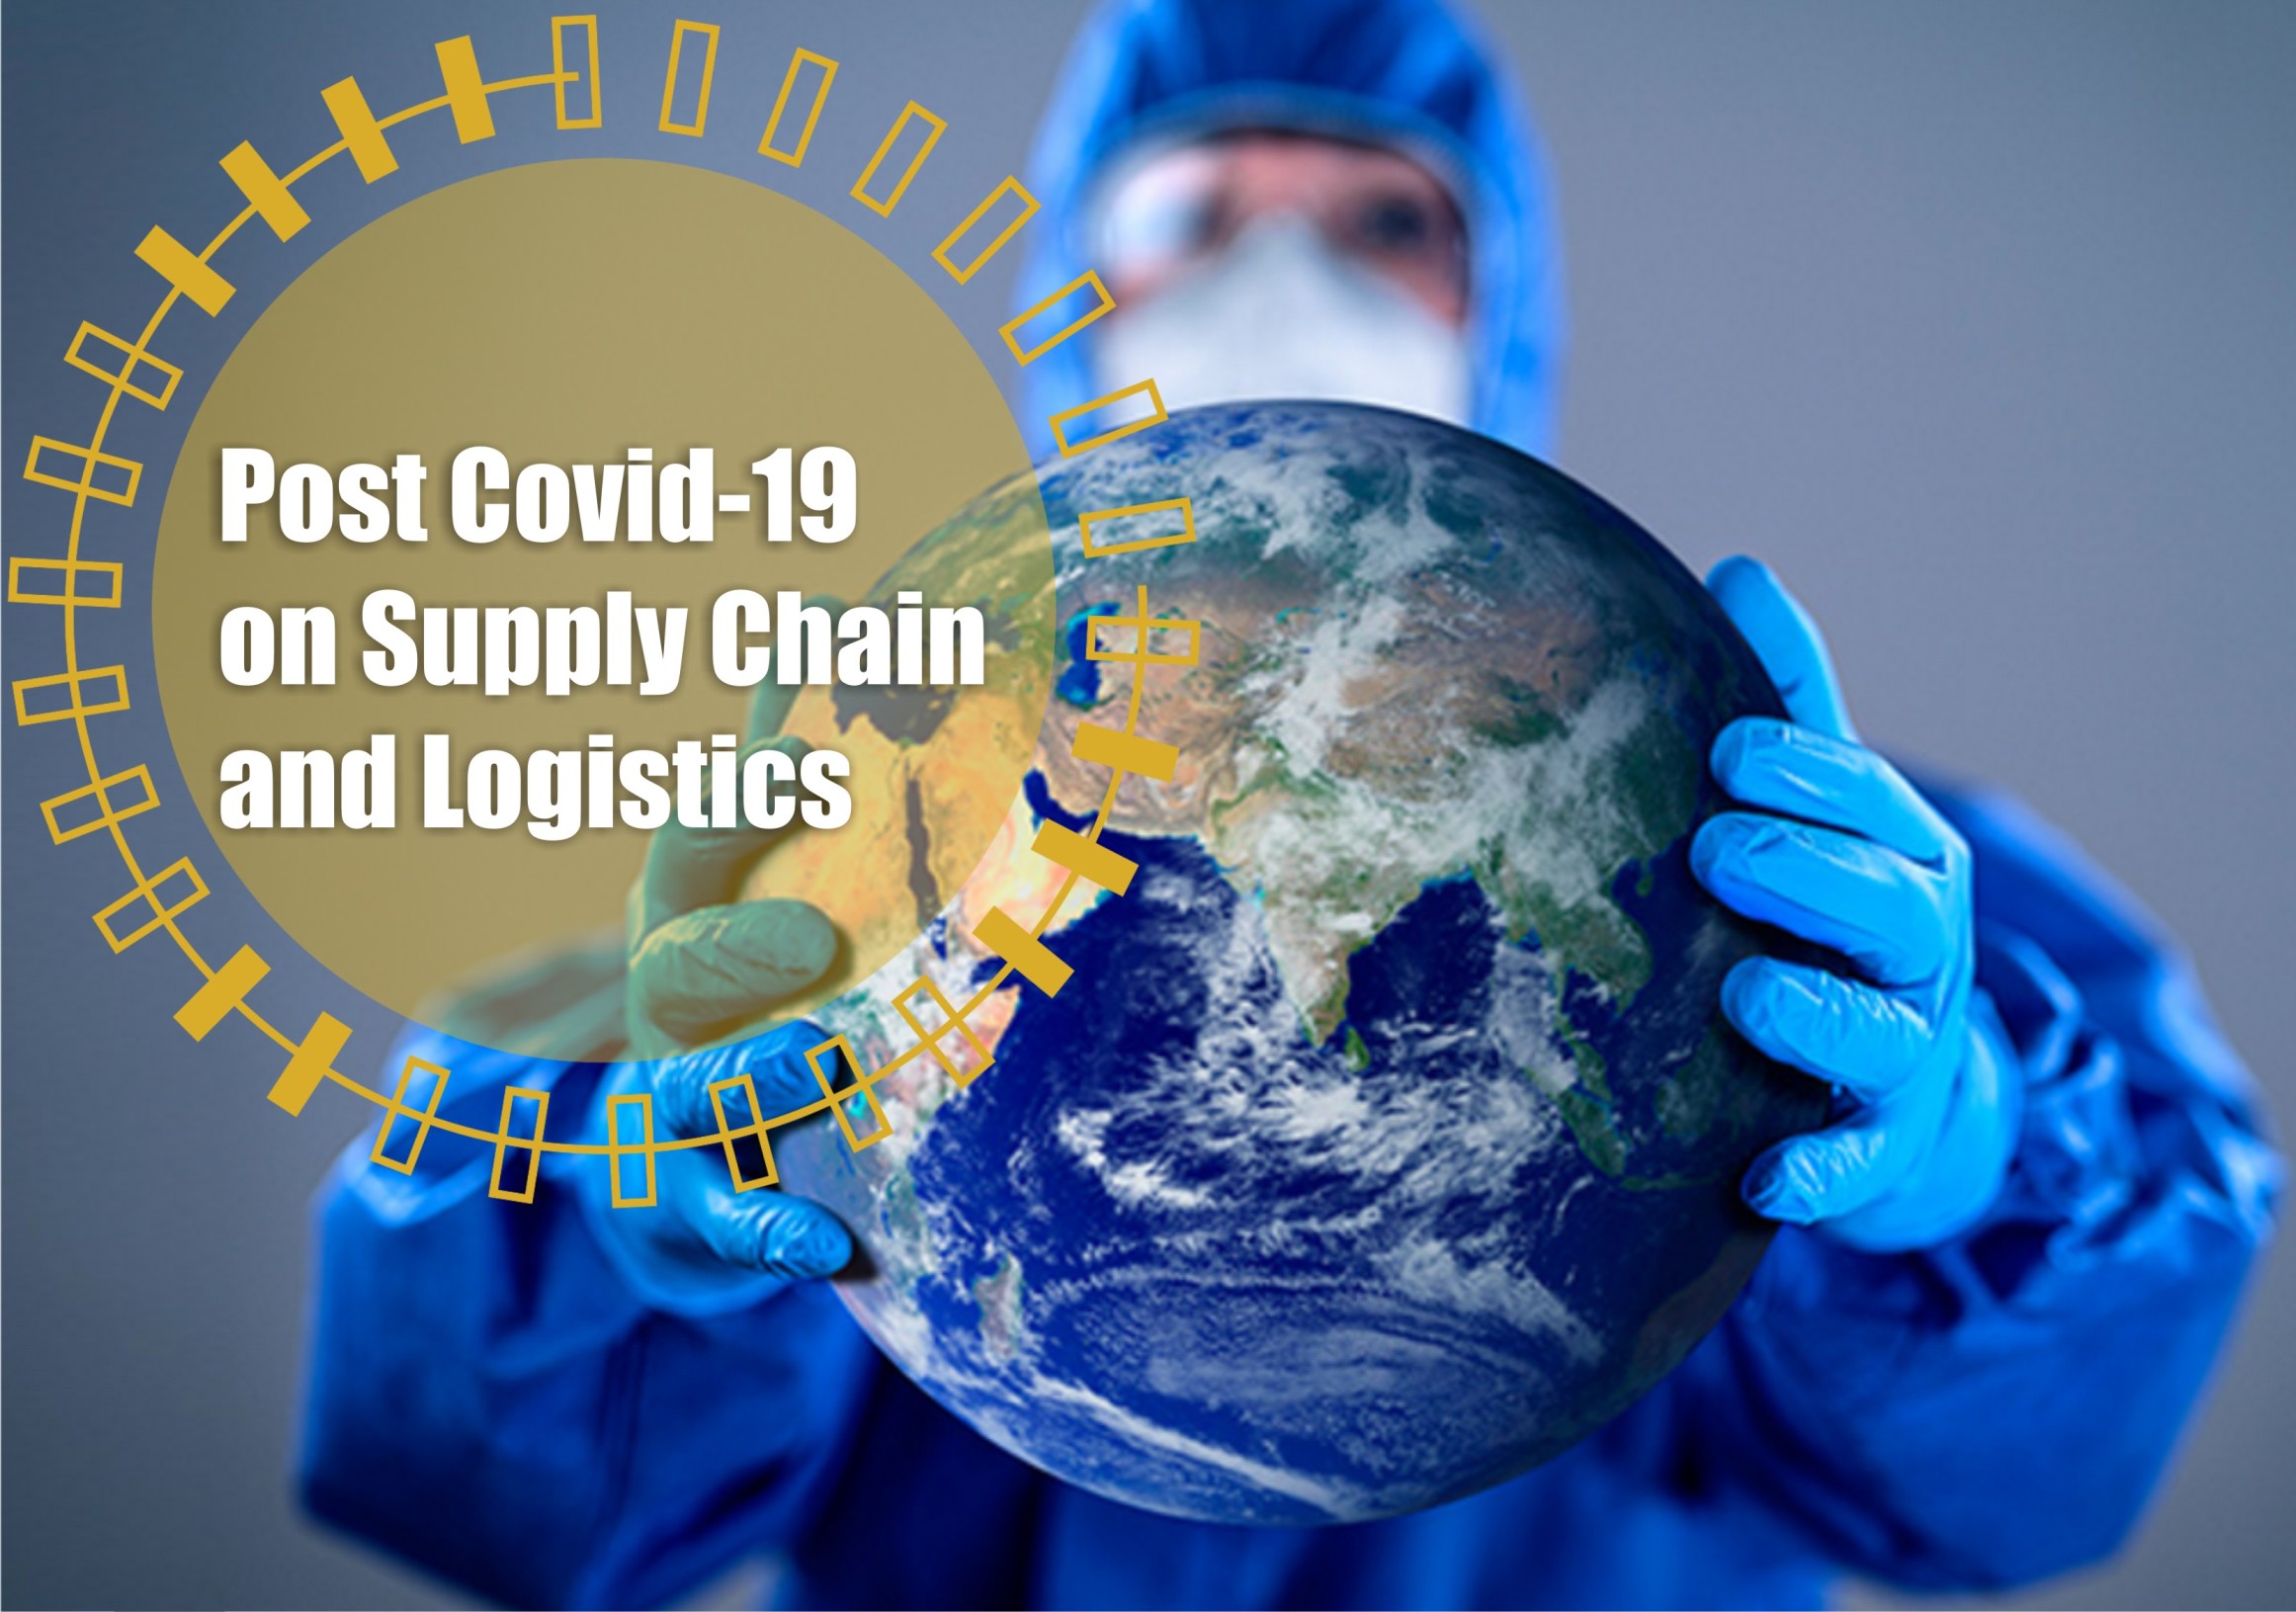 Role of Block Chain in the Post COVID-19 Supply Chain and Logistics.